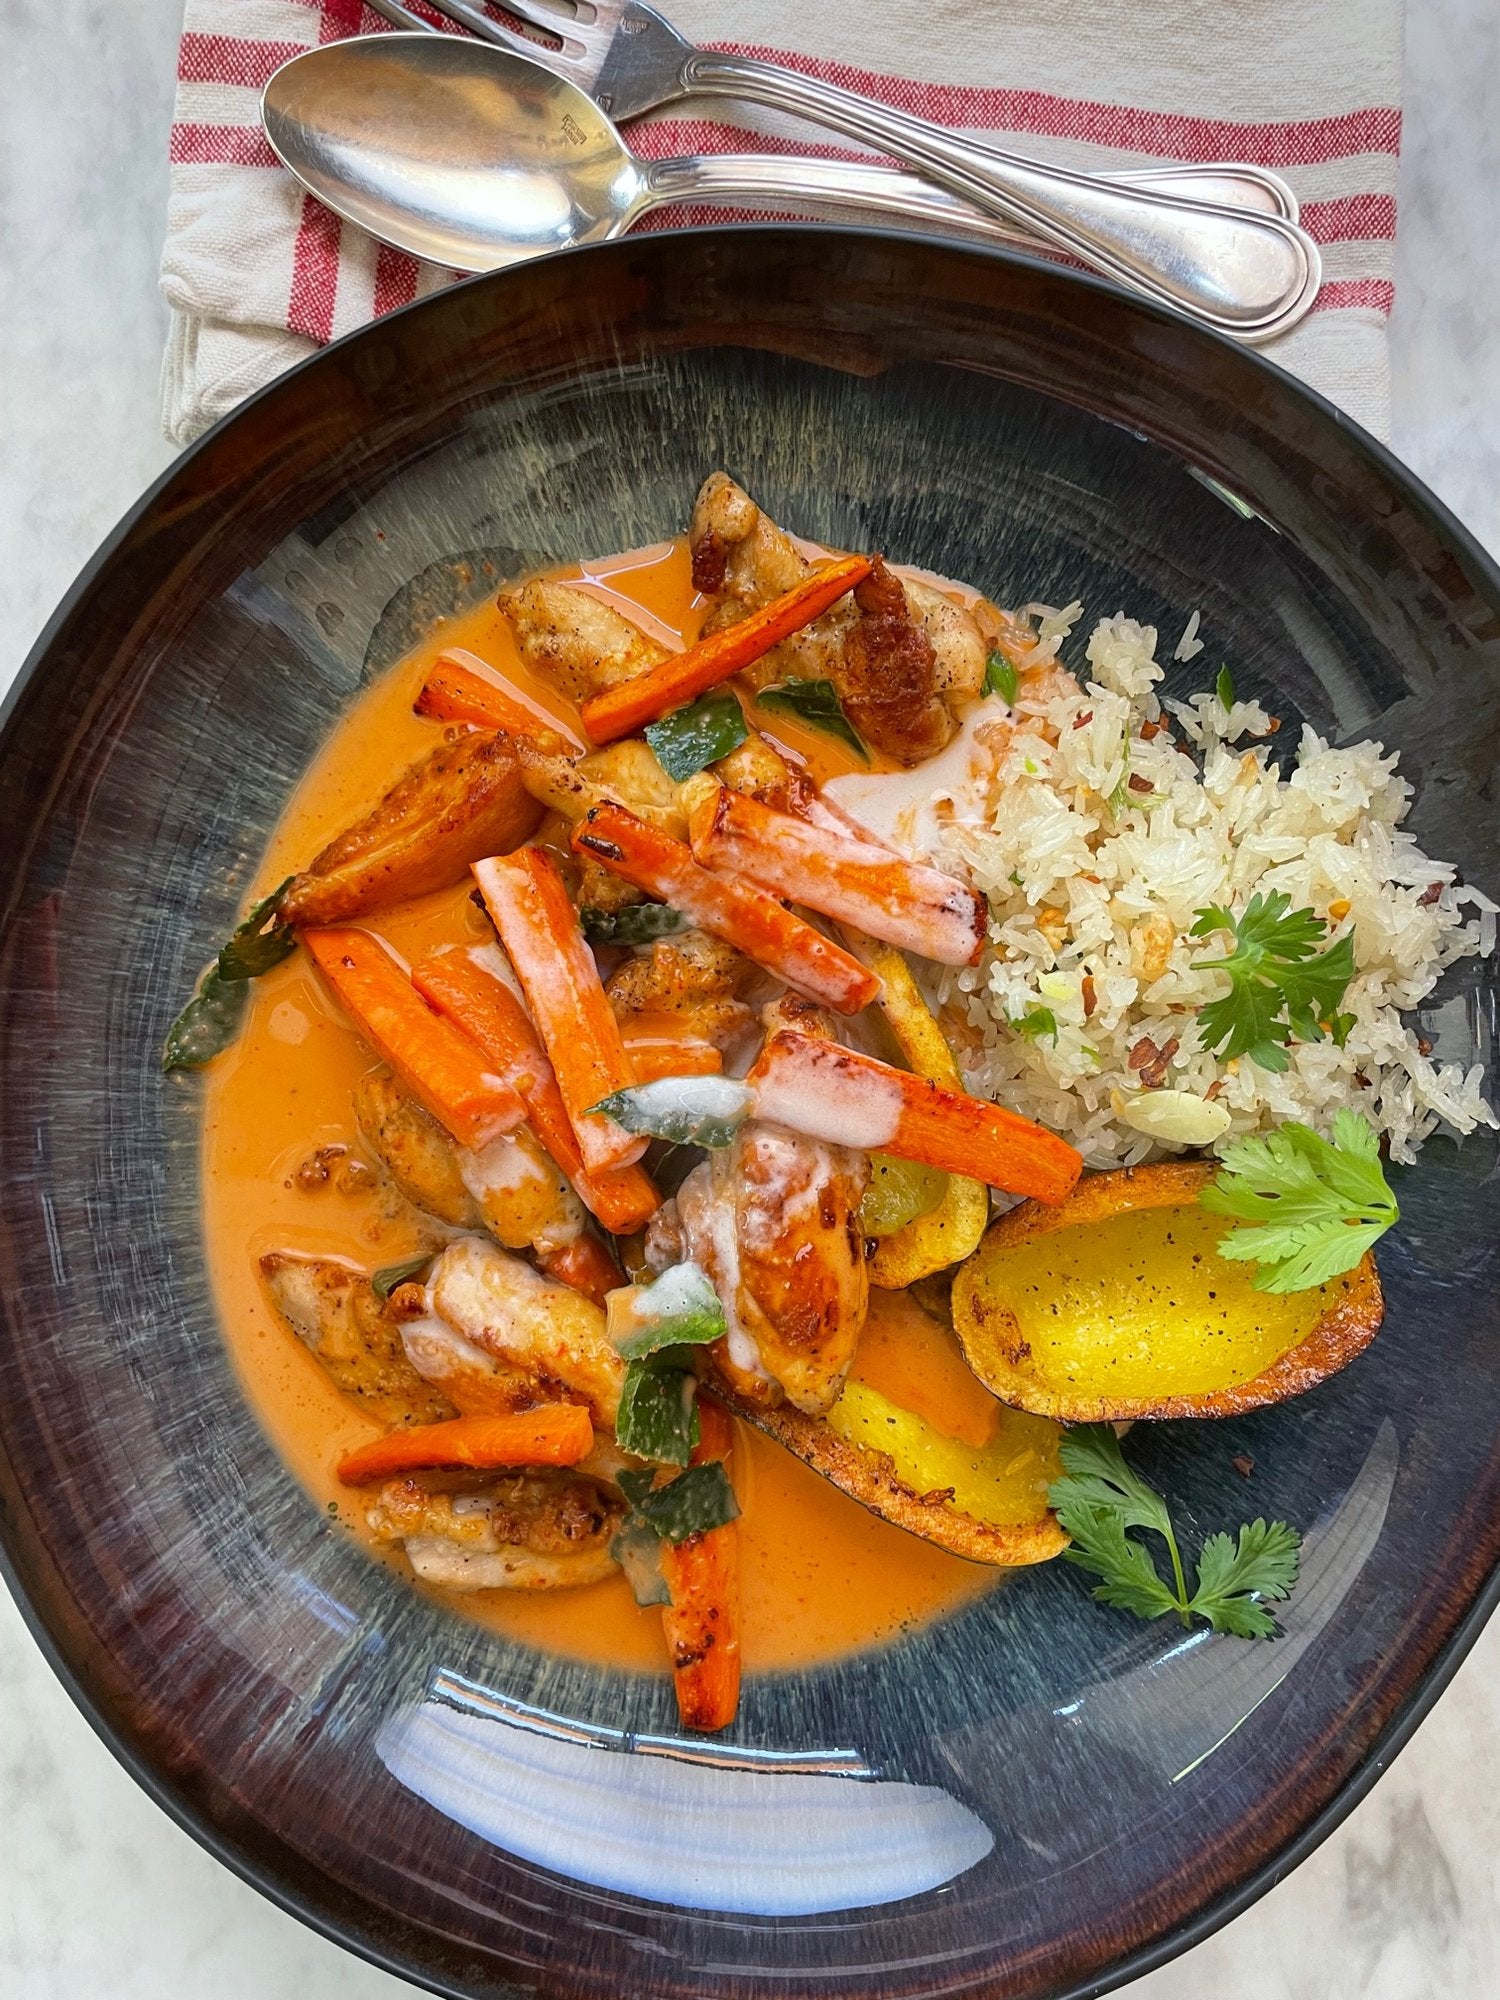 PANANG CURRY WITH CHICKEN & CARROTS